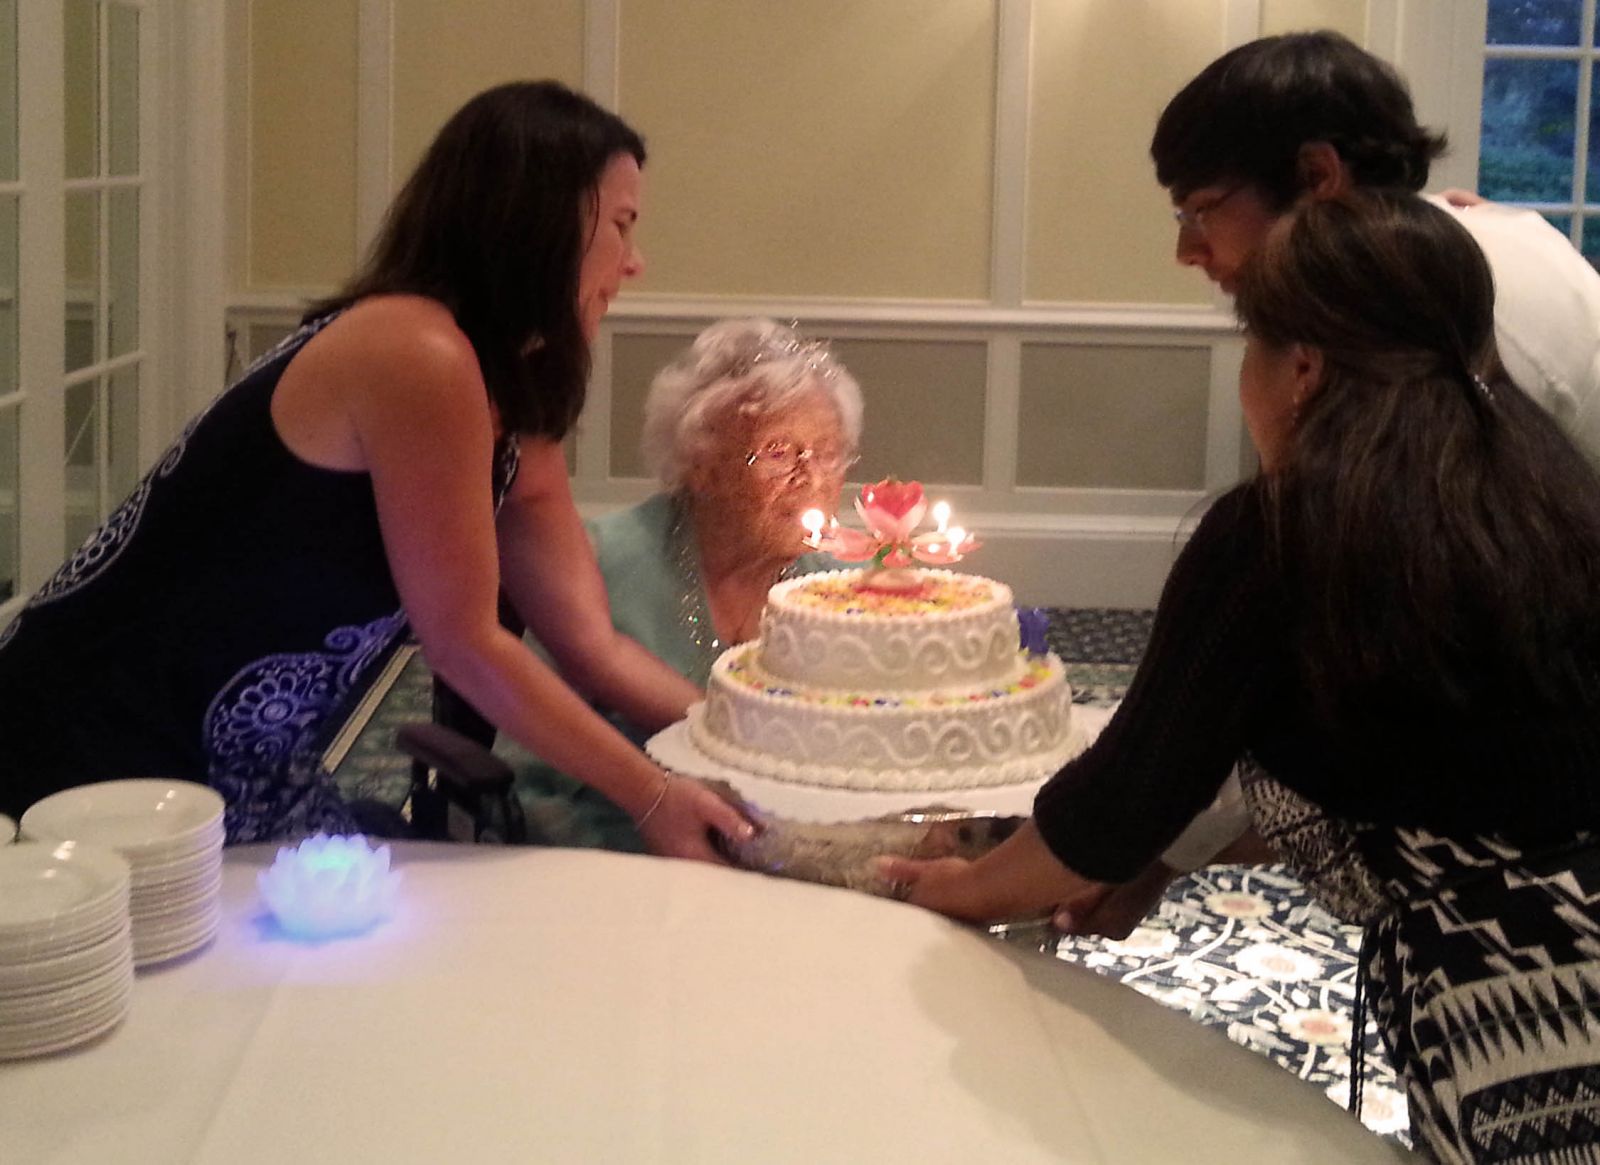 Gertrude blows out the candles on her birthday cake.